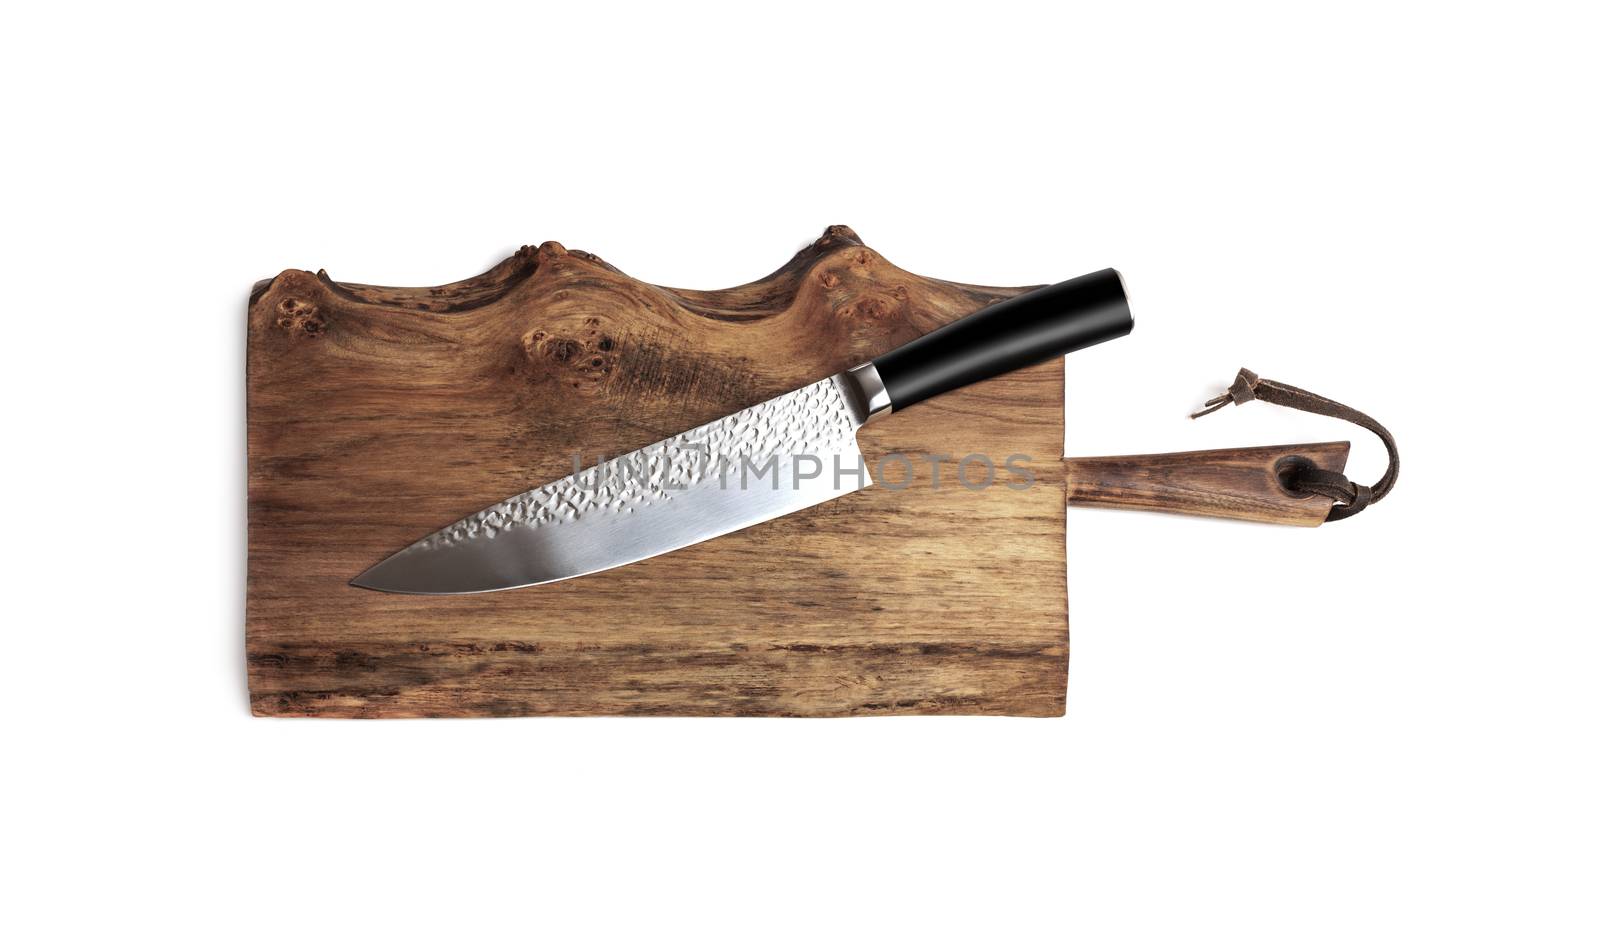 Knife for kitchen on old wooden cutting Board. Isolated on white background